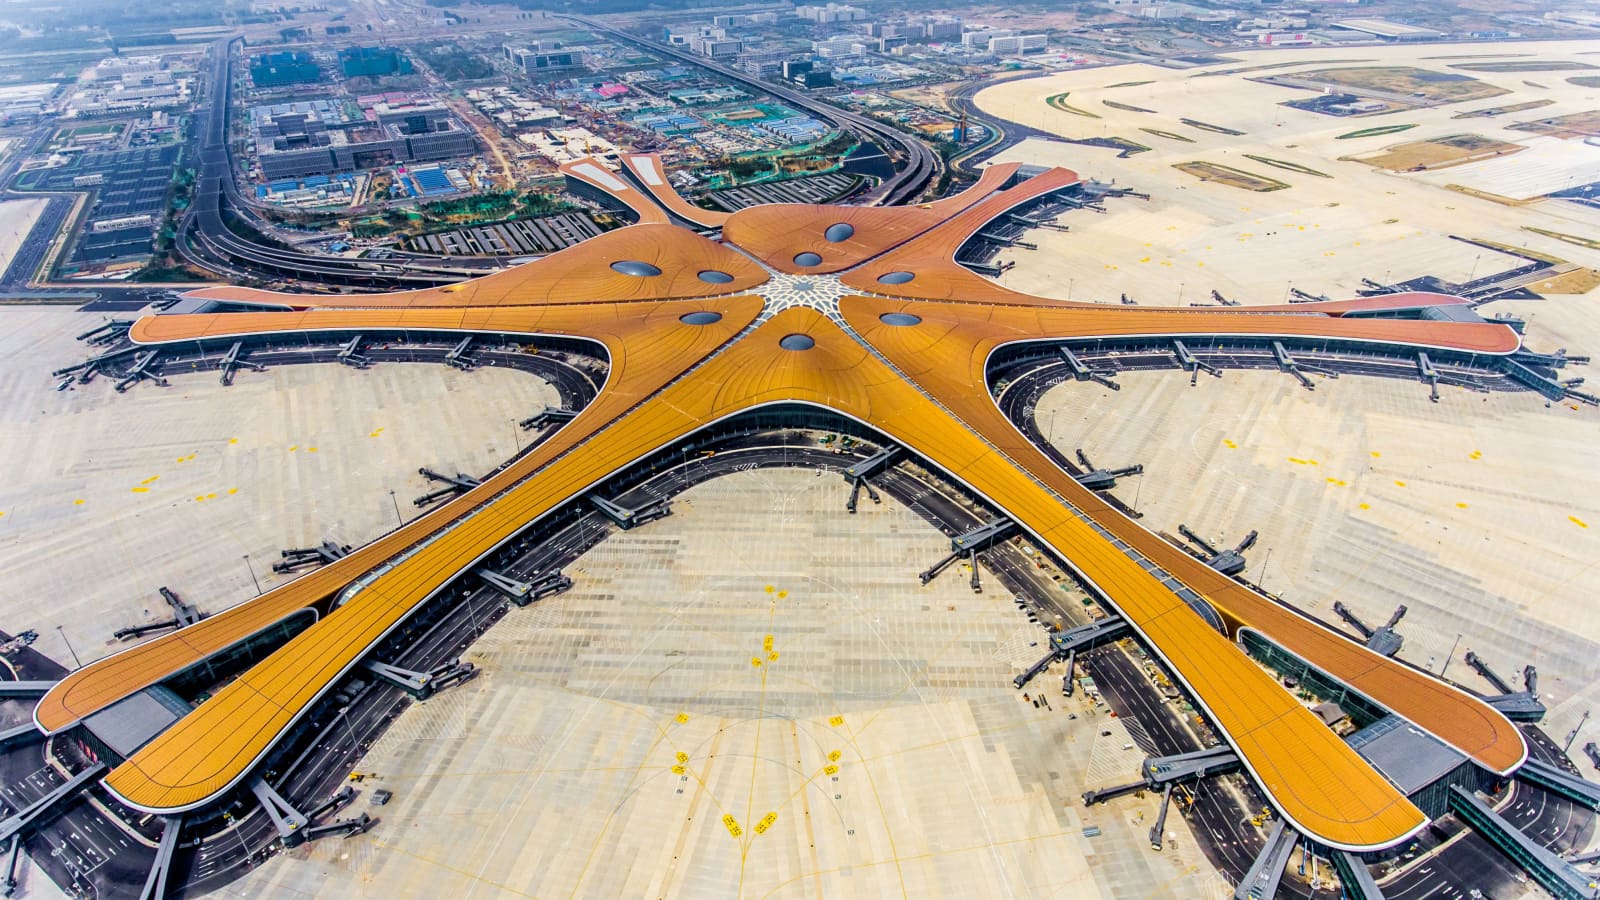 Beijing opens Daxing airport amid growing China air travel demand